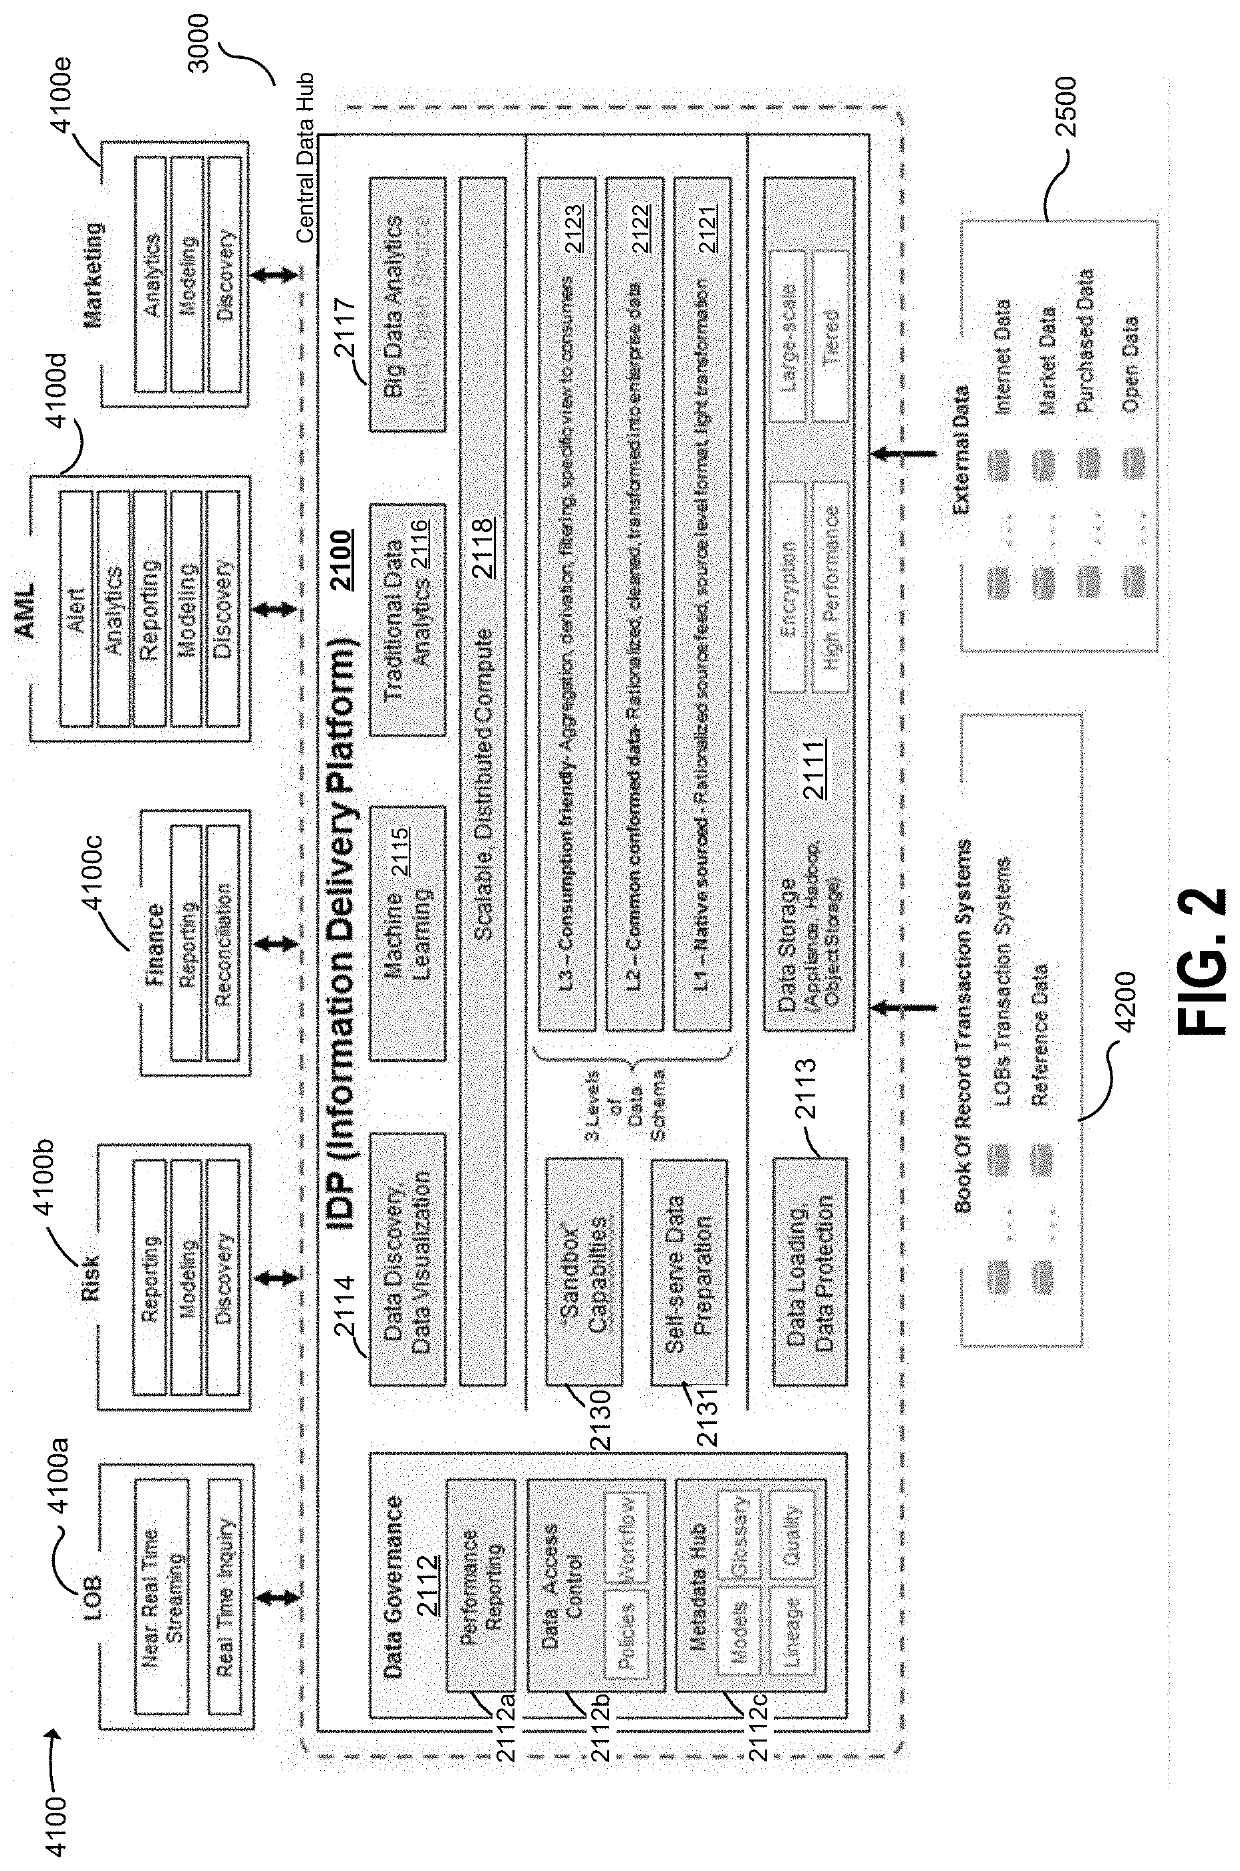 Systems and methods for data storage and processing